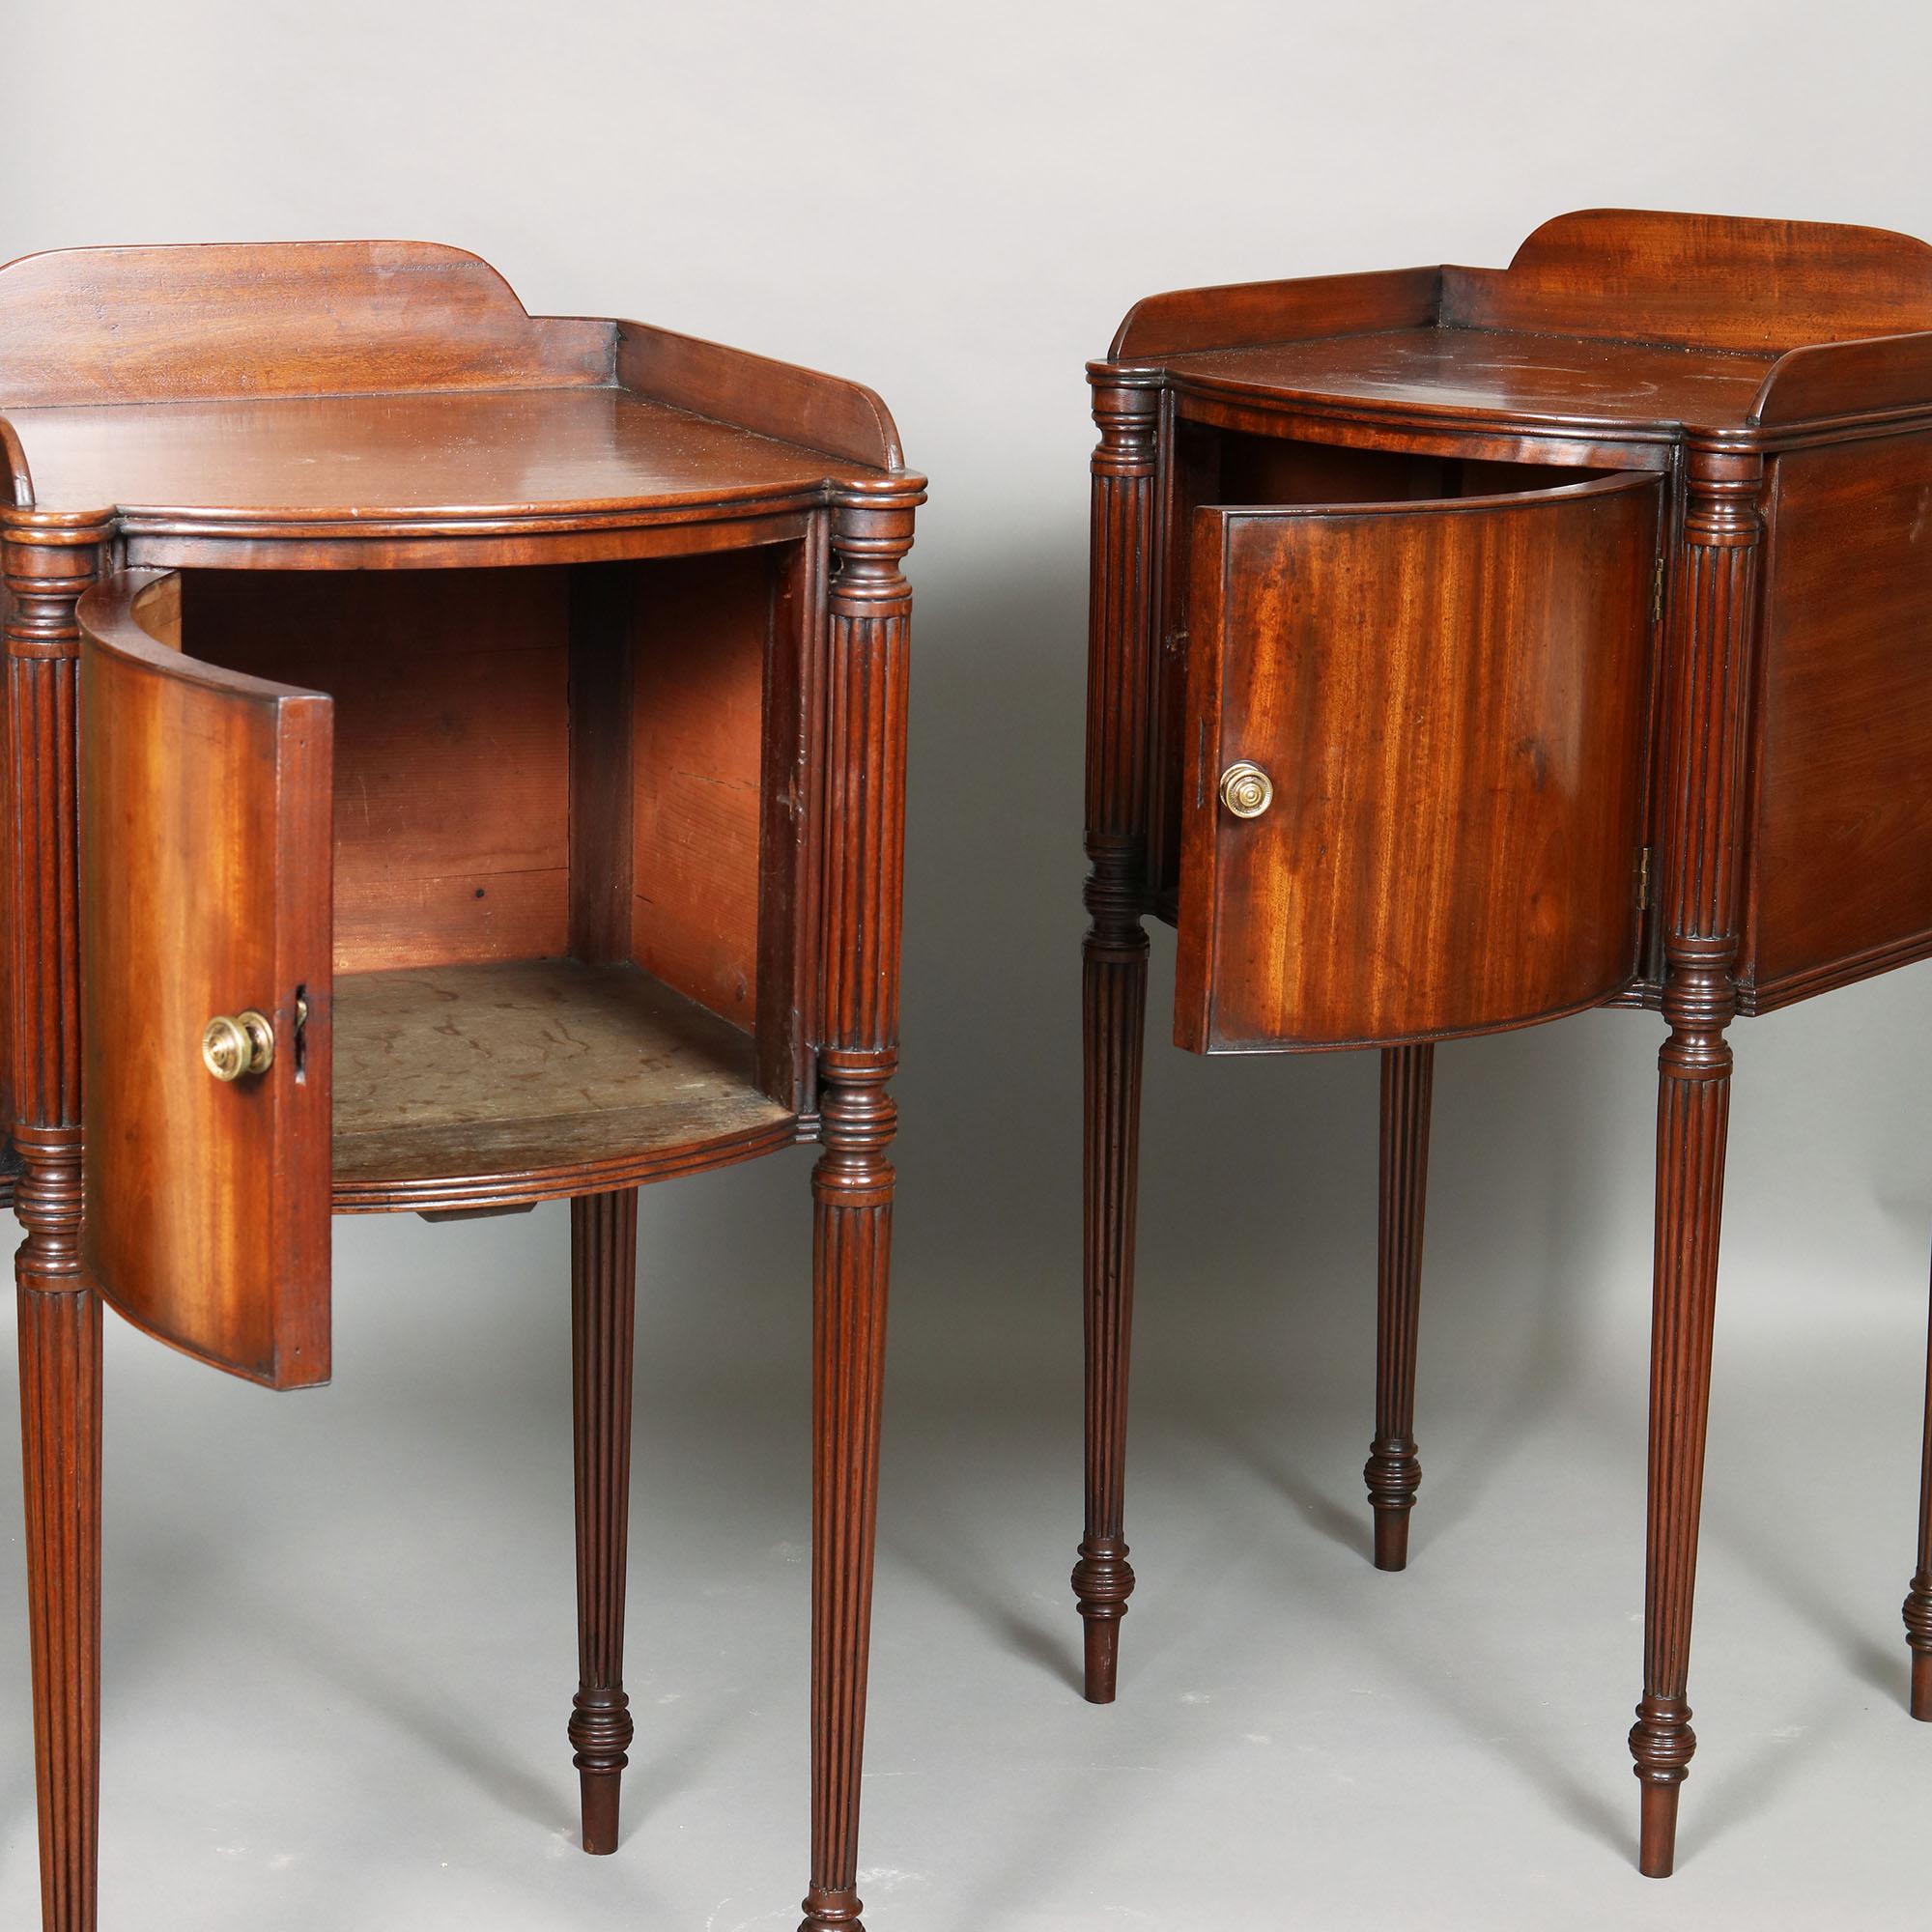 A very useful pair of late 18th century bedside cabinets
Crafted from the finest South American mahogany
With curved opposing doors and raised on tapering fluted legs in the manner of Gillows
The grain of the mahogany veneer is laid vertically